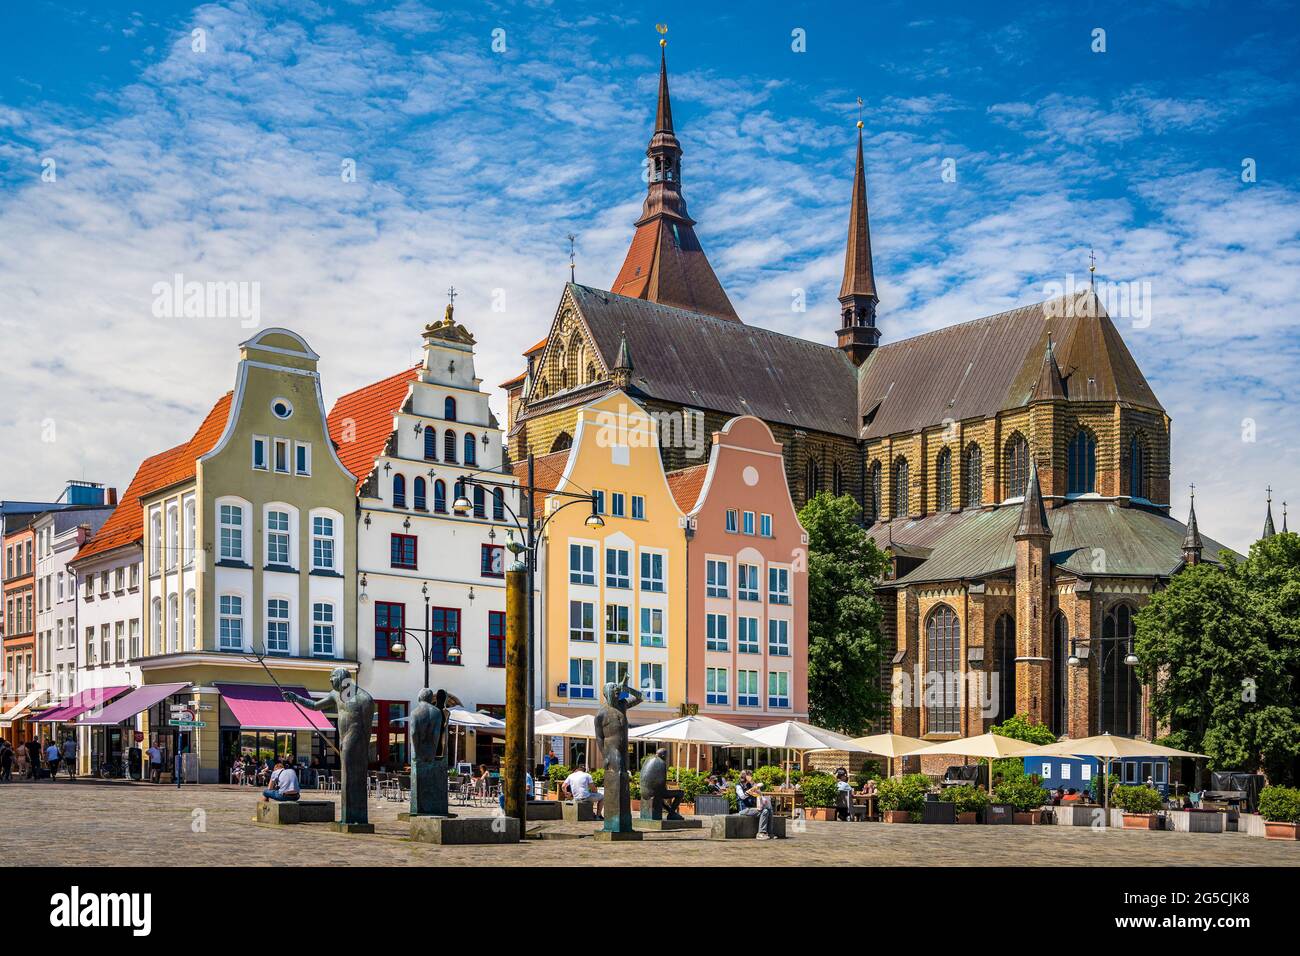 Neuer Markt square in the old town of Rostock, Germany Stock Photo